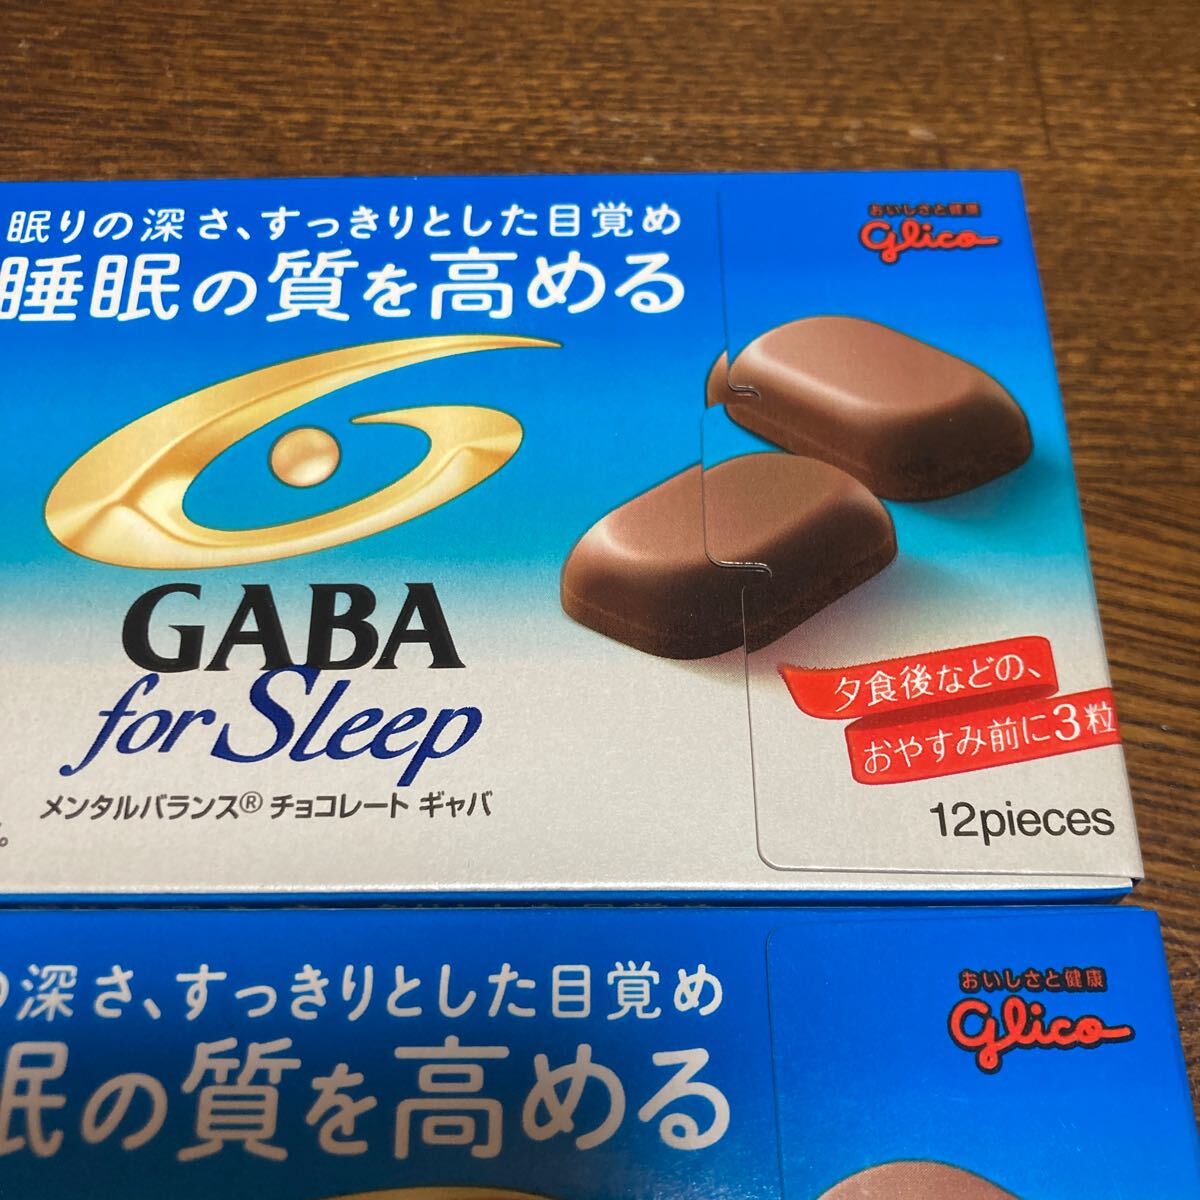  Glyco GABAgyaba four sleep chocolate confection sleeping. quality . raise functionality display food Gold coupon use free shipping prompt decision 